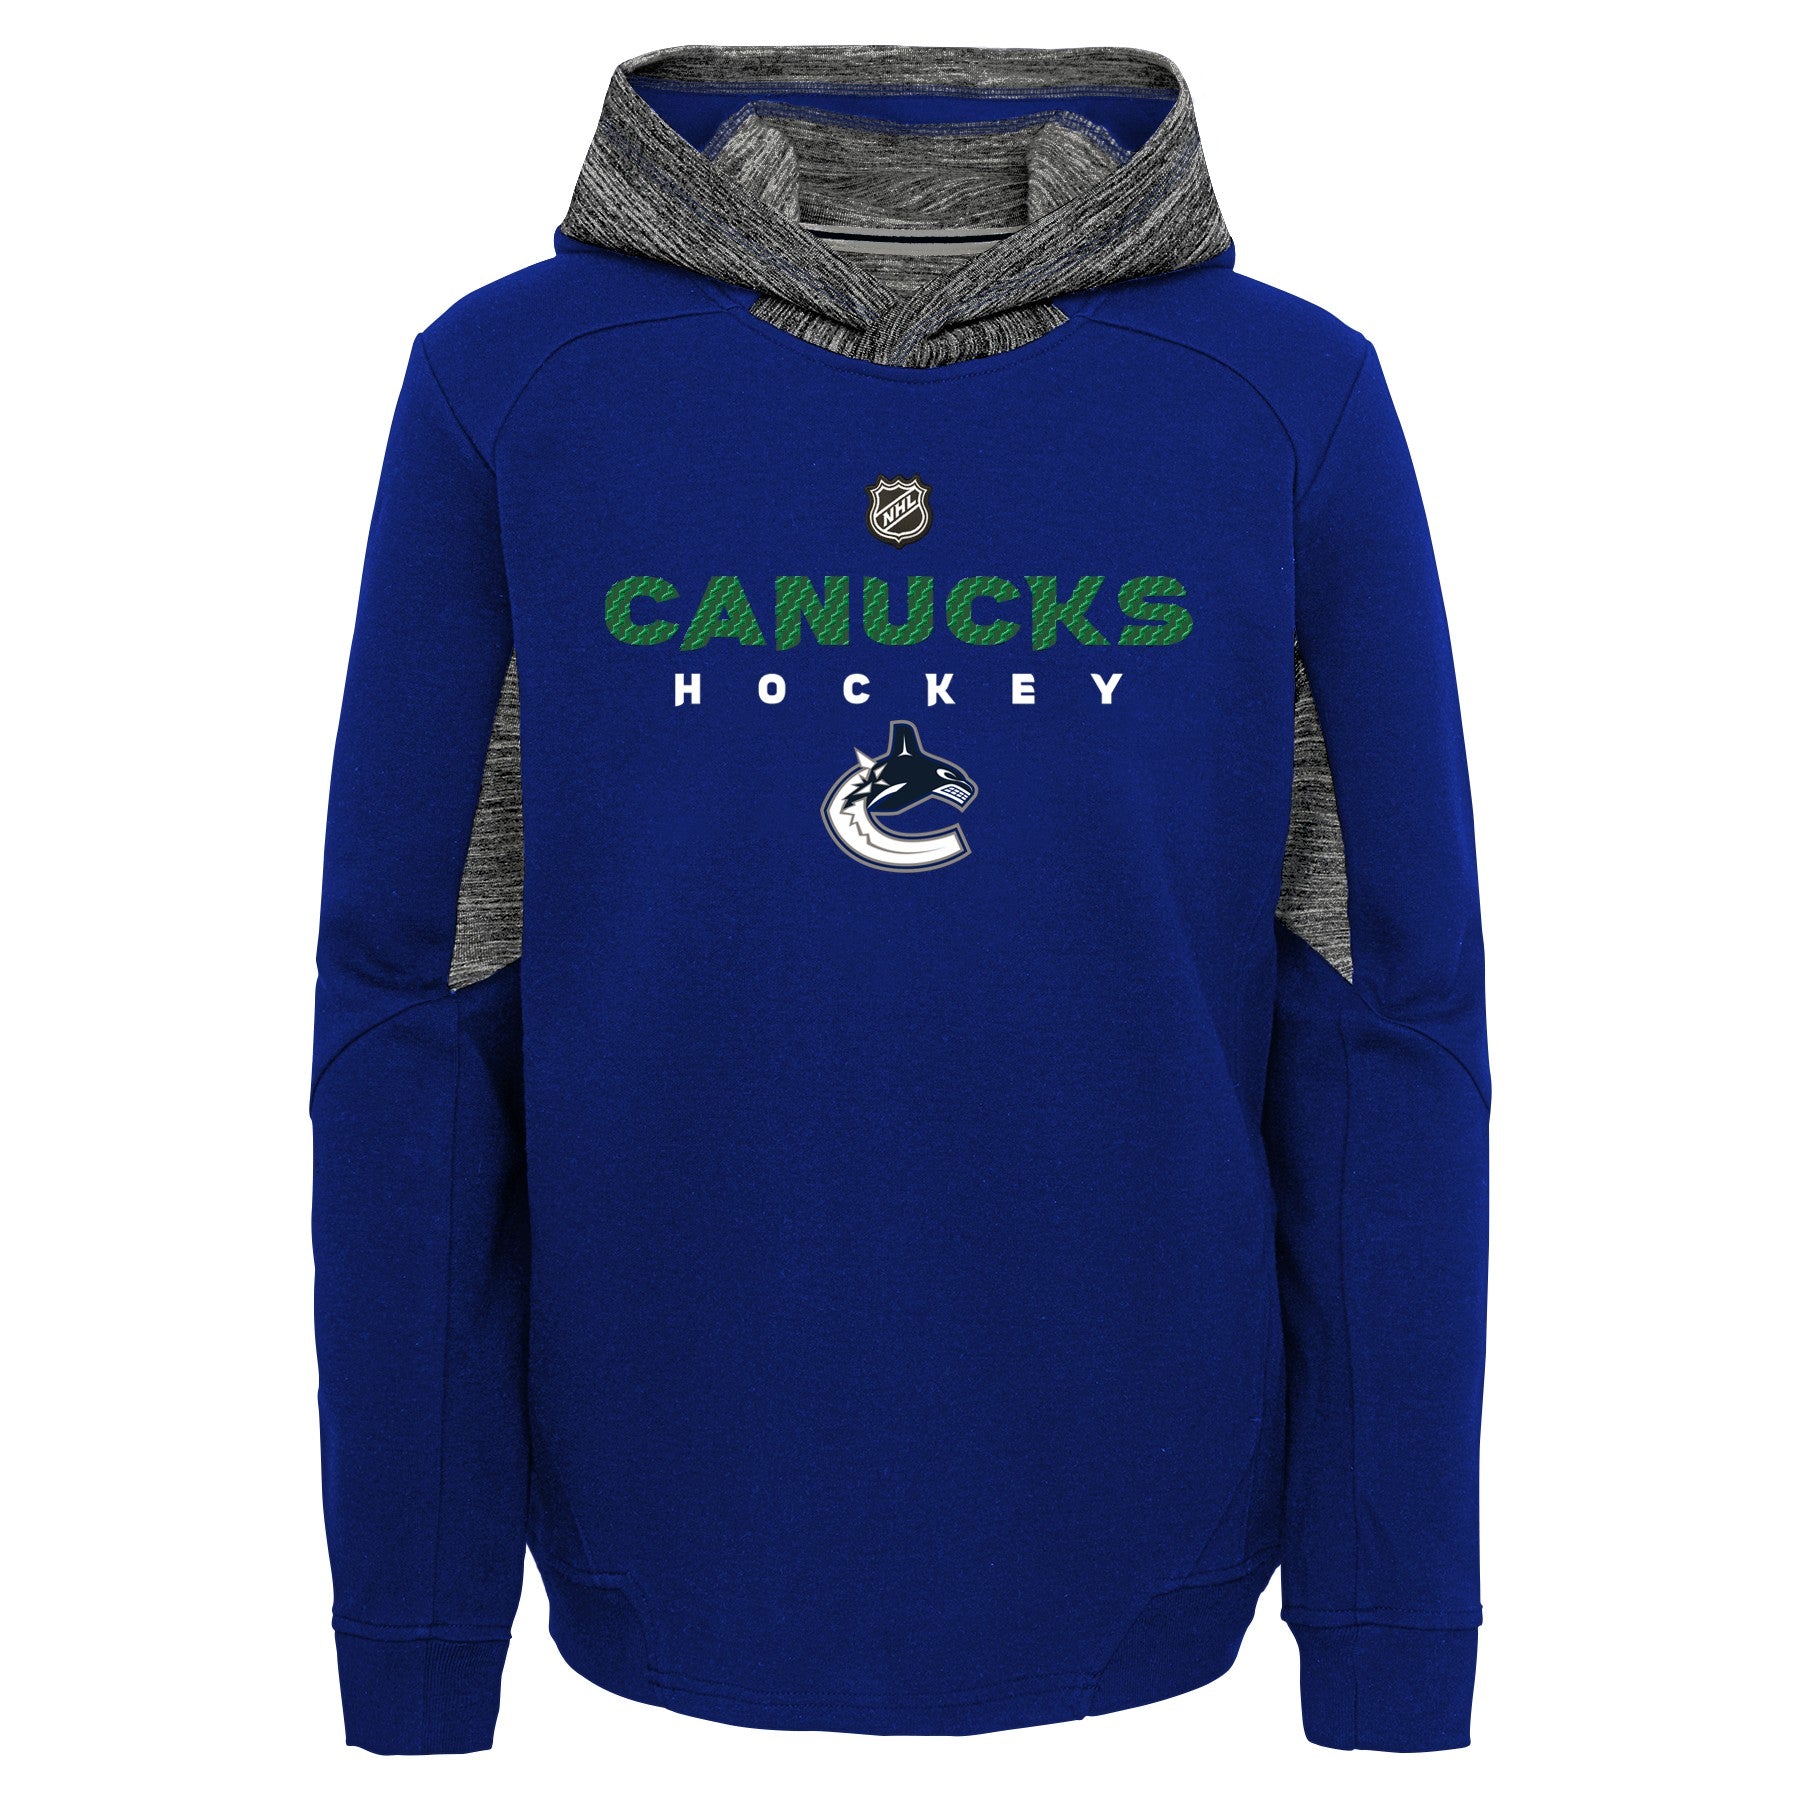 Vancouver Canucks Hoodies, Canucks Sweatshirts, Fleeces, Vancouver Canucks  Pullovers